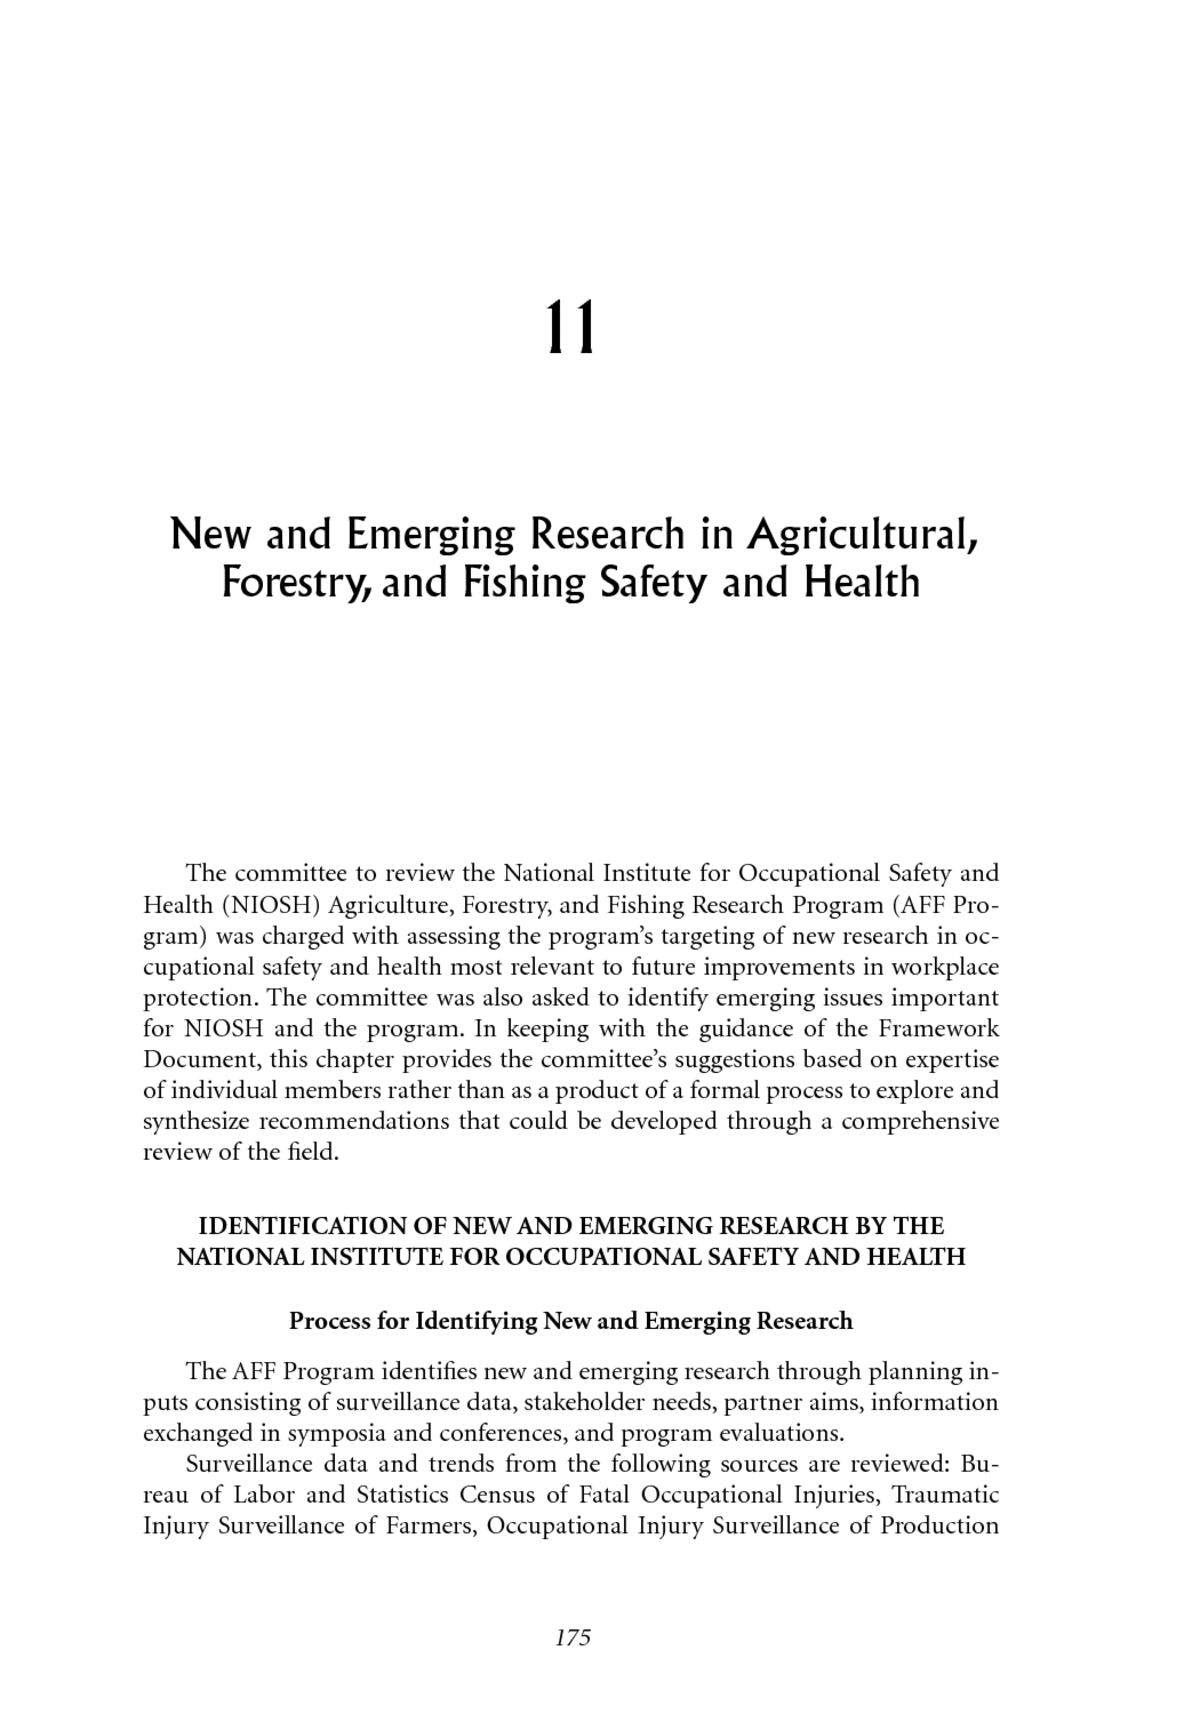 research topic in agriculture and fisheries